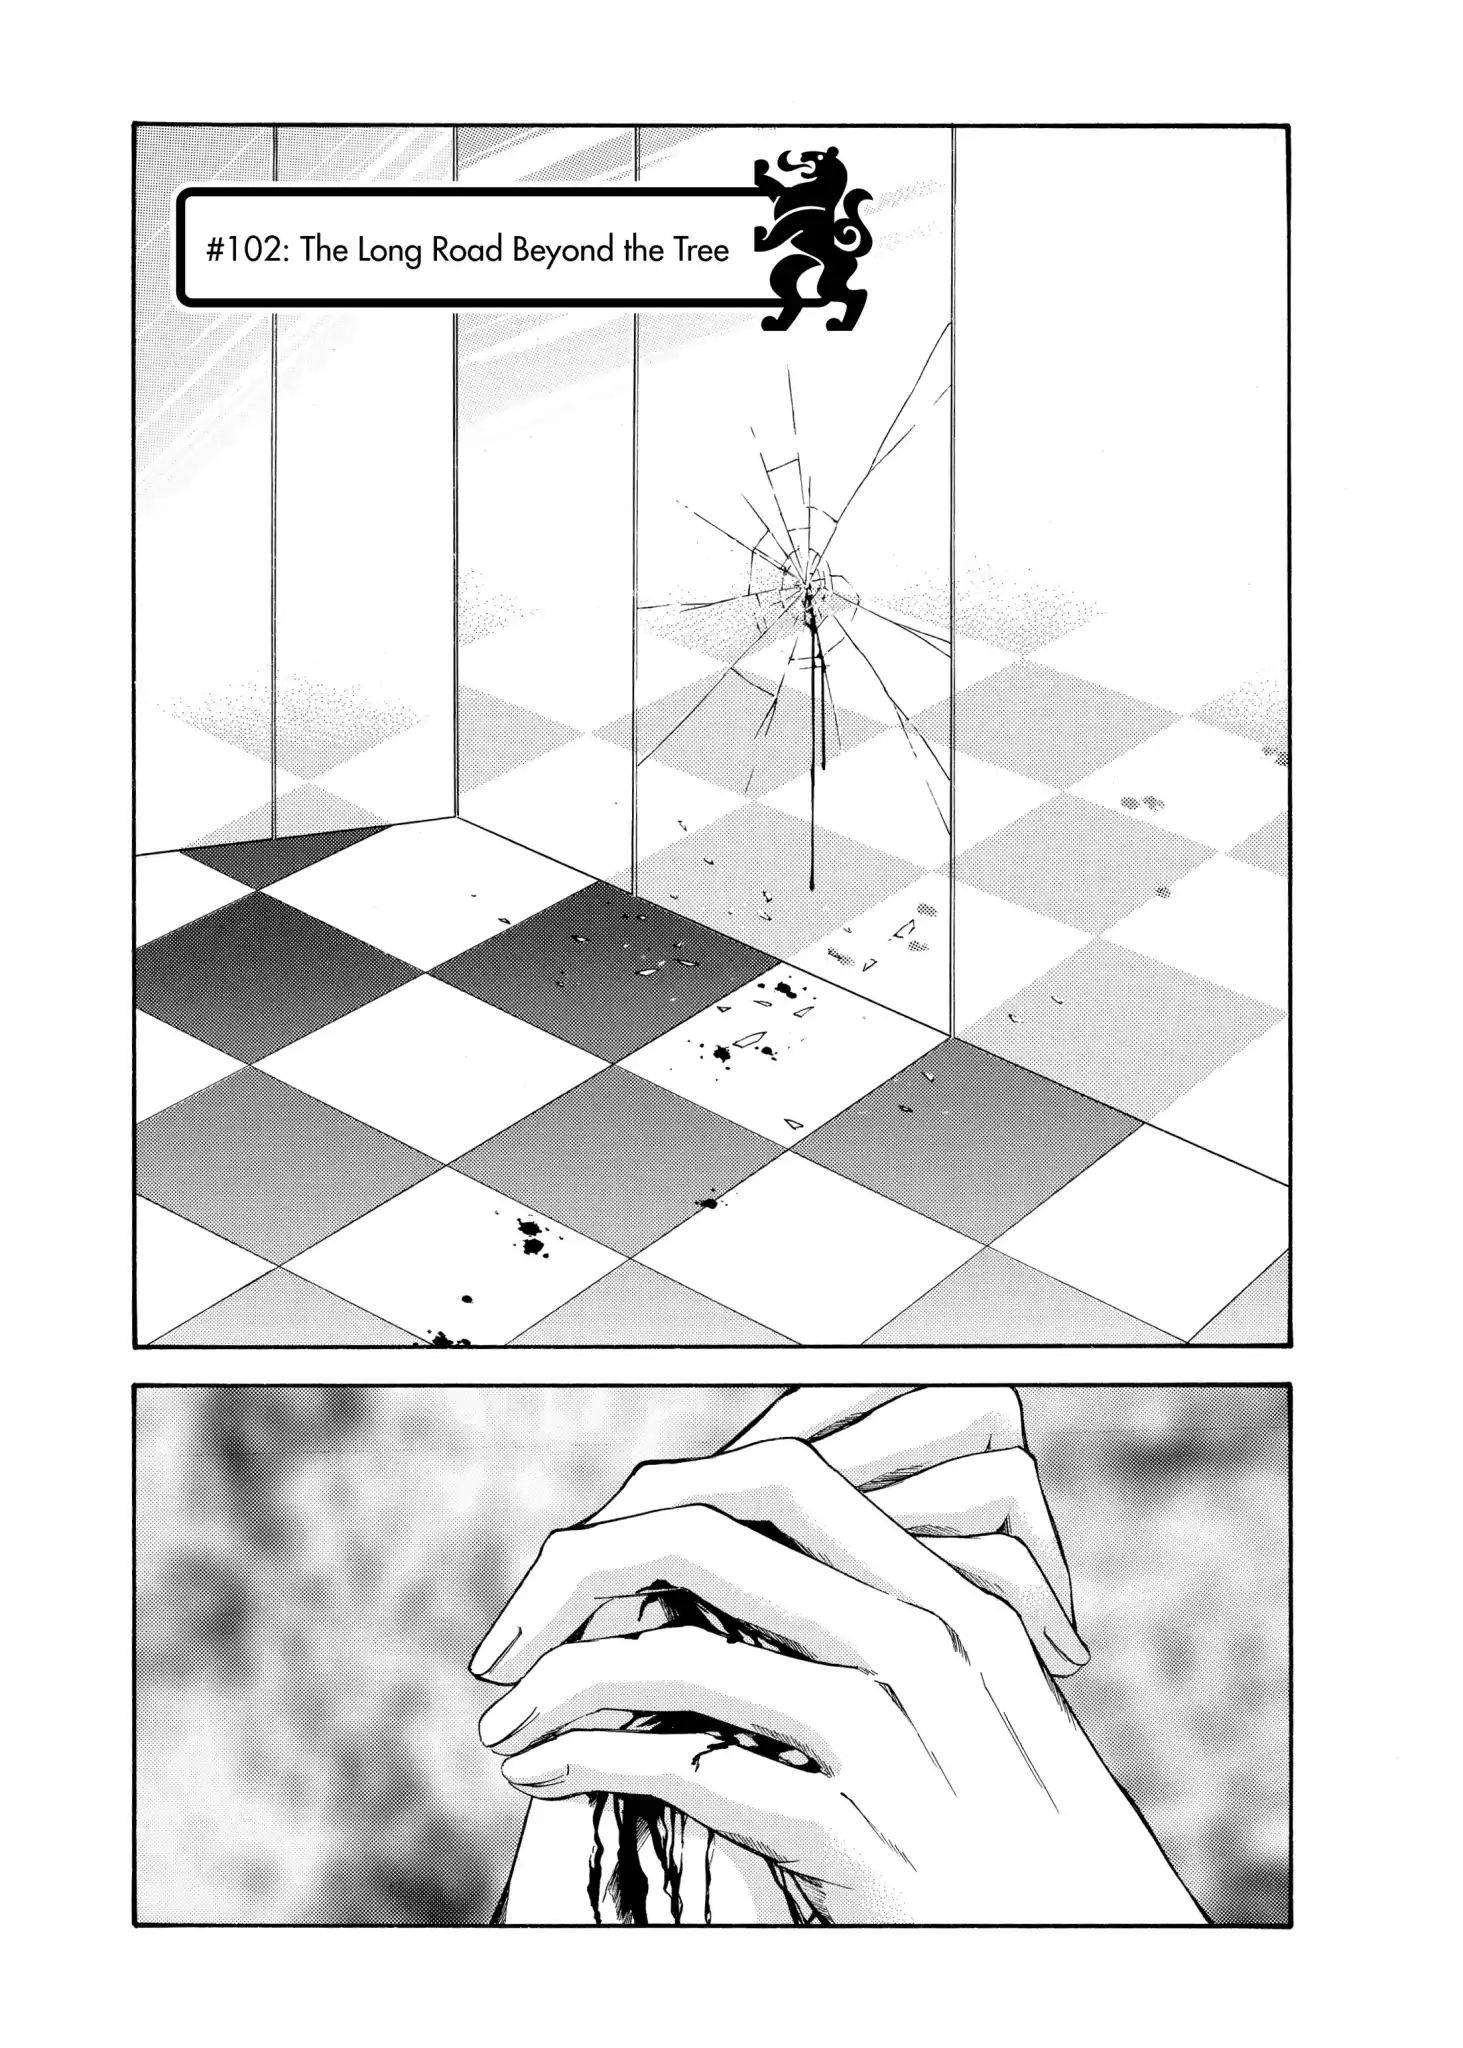 Kami No Shizuku Vol.11 Chapter 102: The Long Road Beyond The Tree - Picture 1